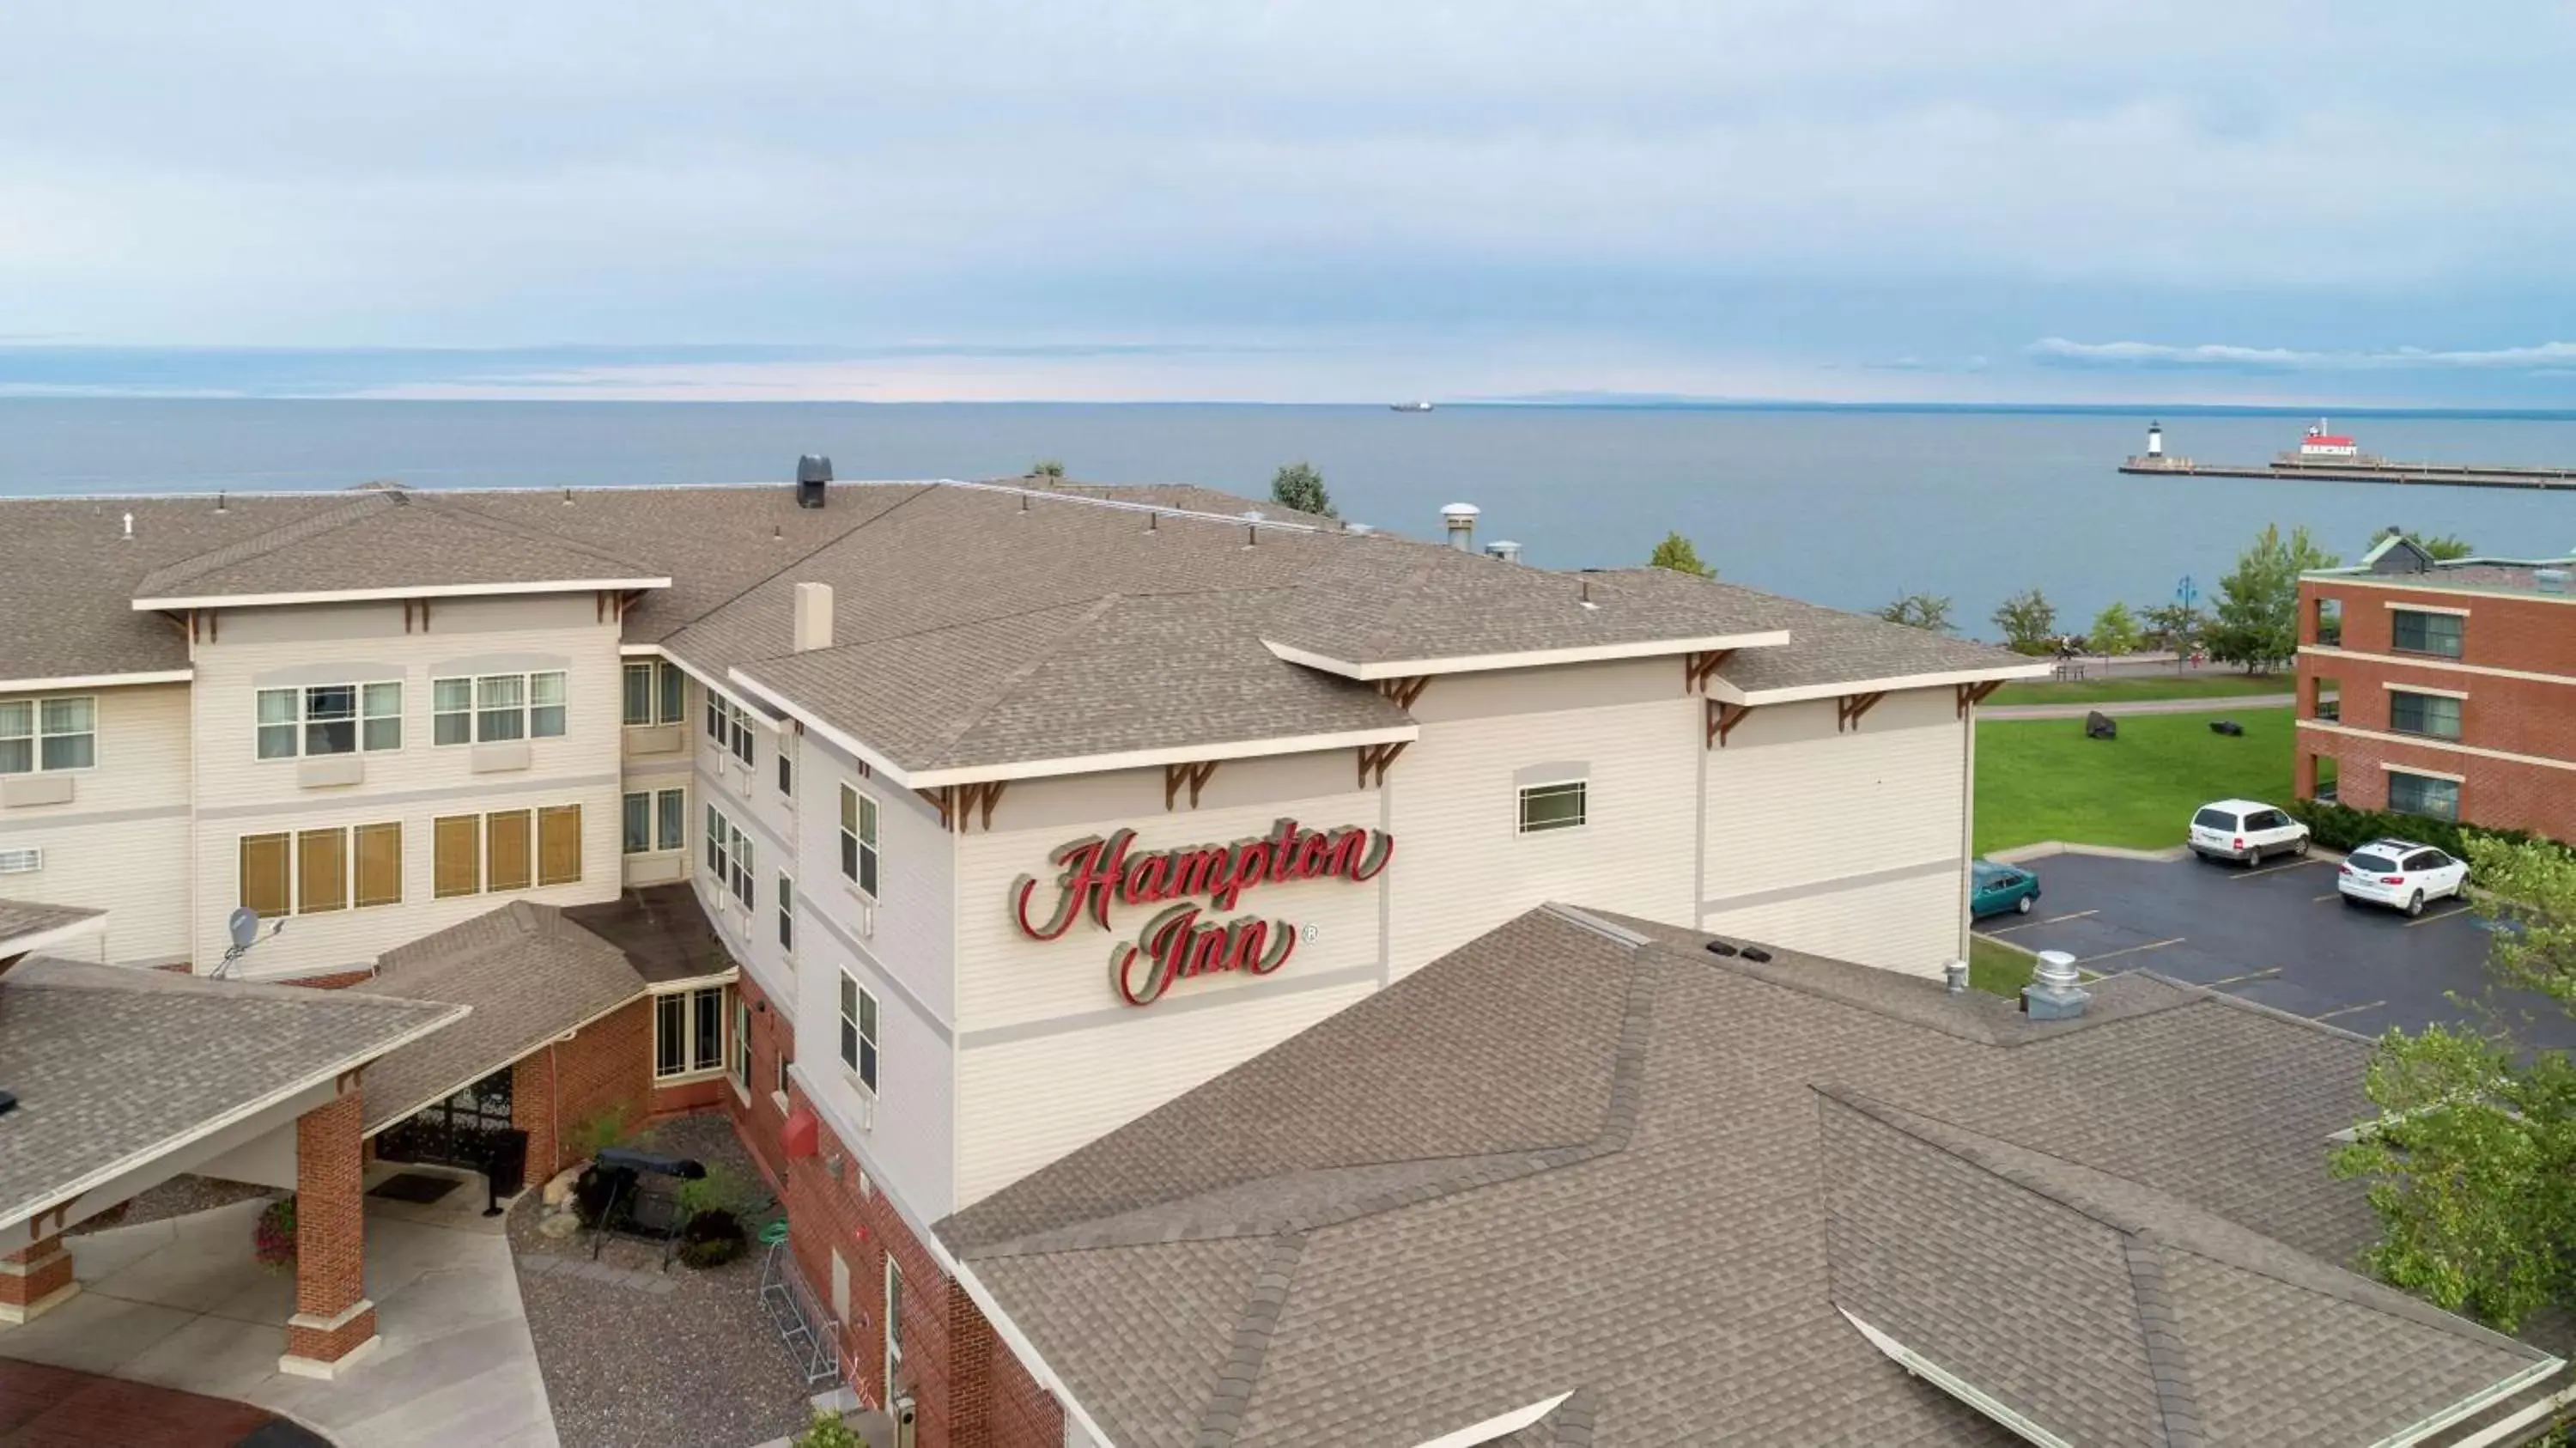 Property building, Sea View in Hampton Inn Duluth-Canal Park